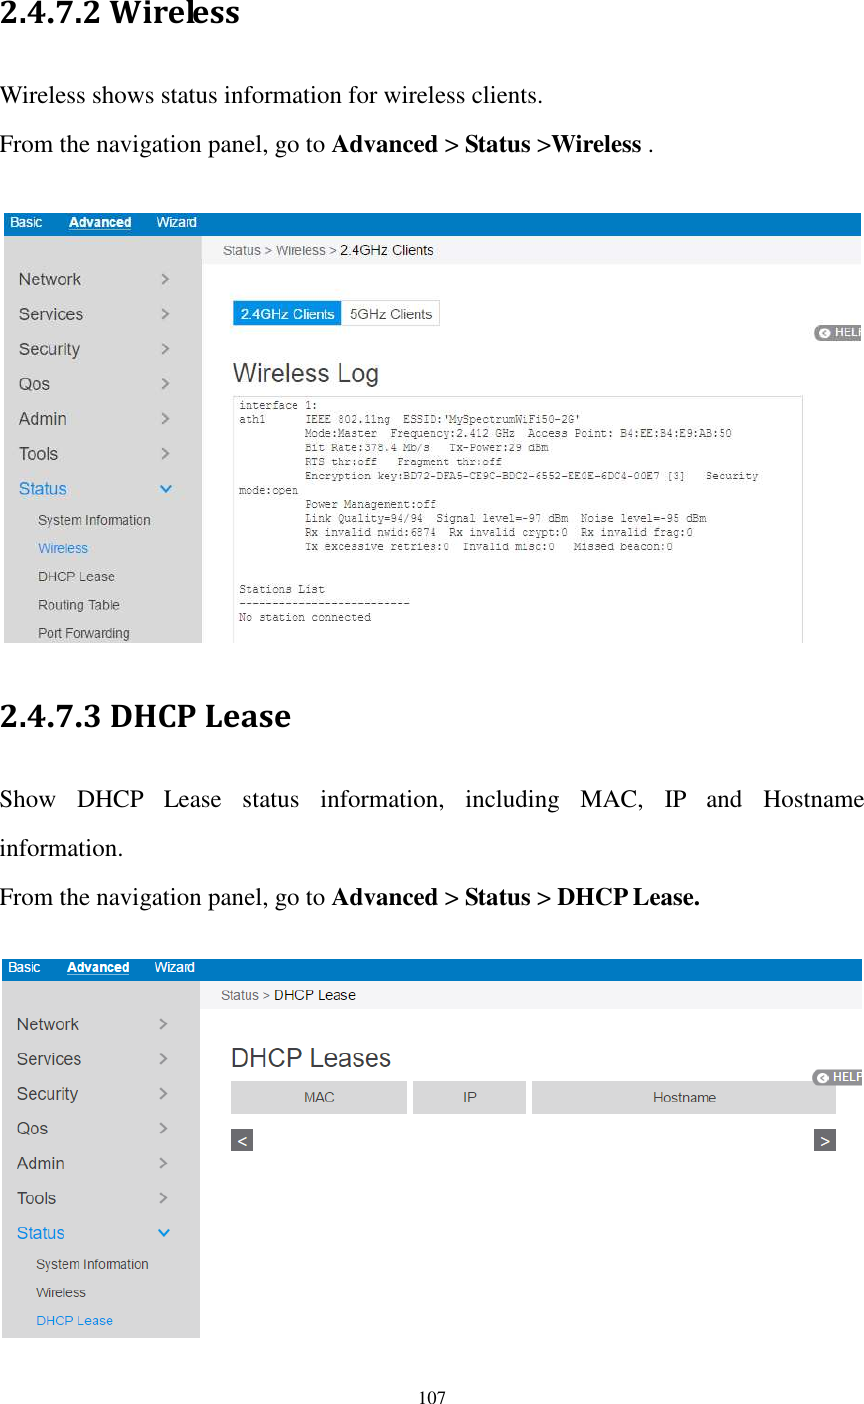  107  2.4.7.2 Wireless   Wireless shows status information for wireless clients. From the navigation panel, go to Advanced &gt; Status &gt;Wireless .   2.4.7.3 DHCP Lease Show  DHCP  Lease  status  information,  including  MAC,  IP  and  Hostname information. From the navigation panel, go to Advanced &gt; Status &gt; DHCP Lease.   